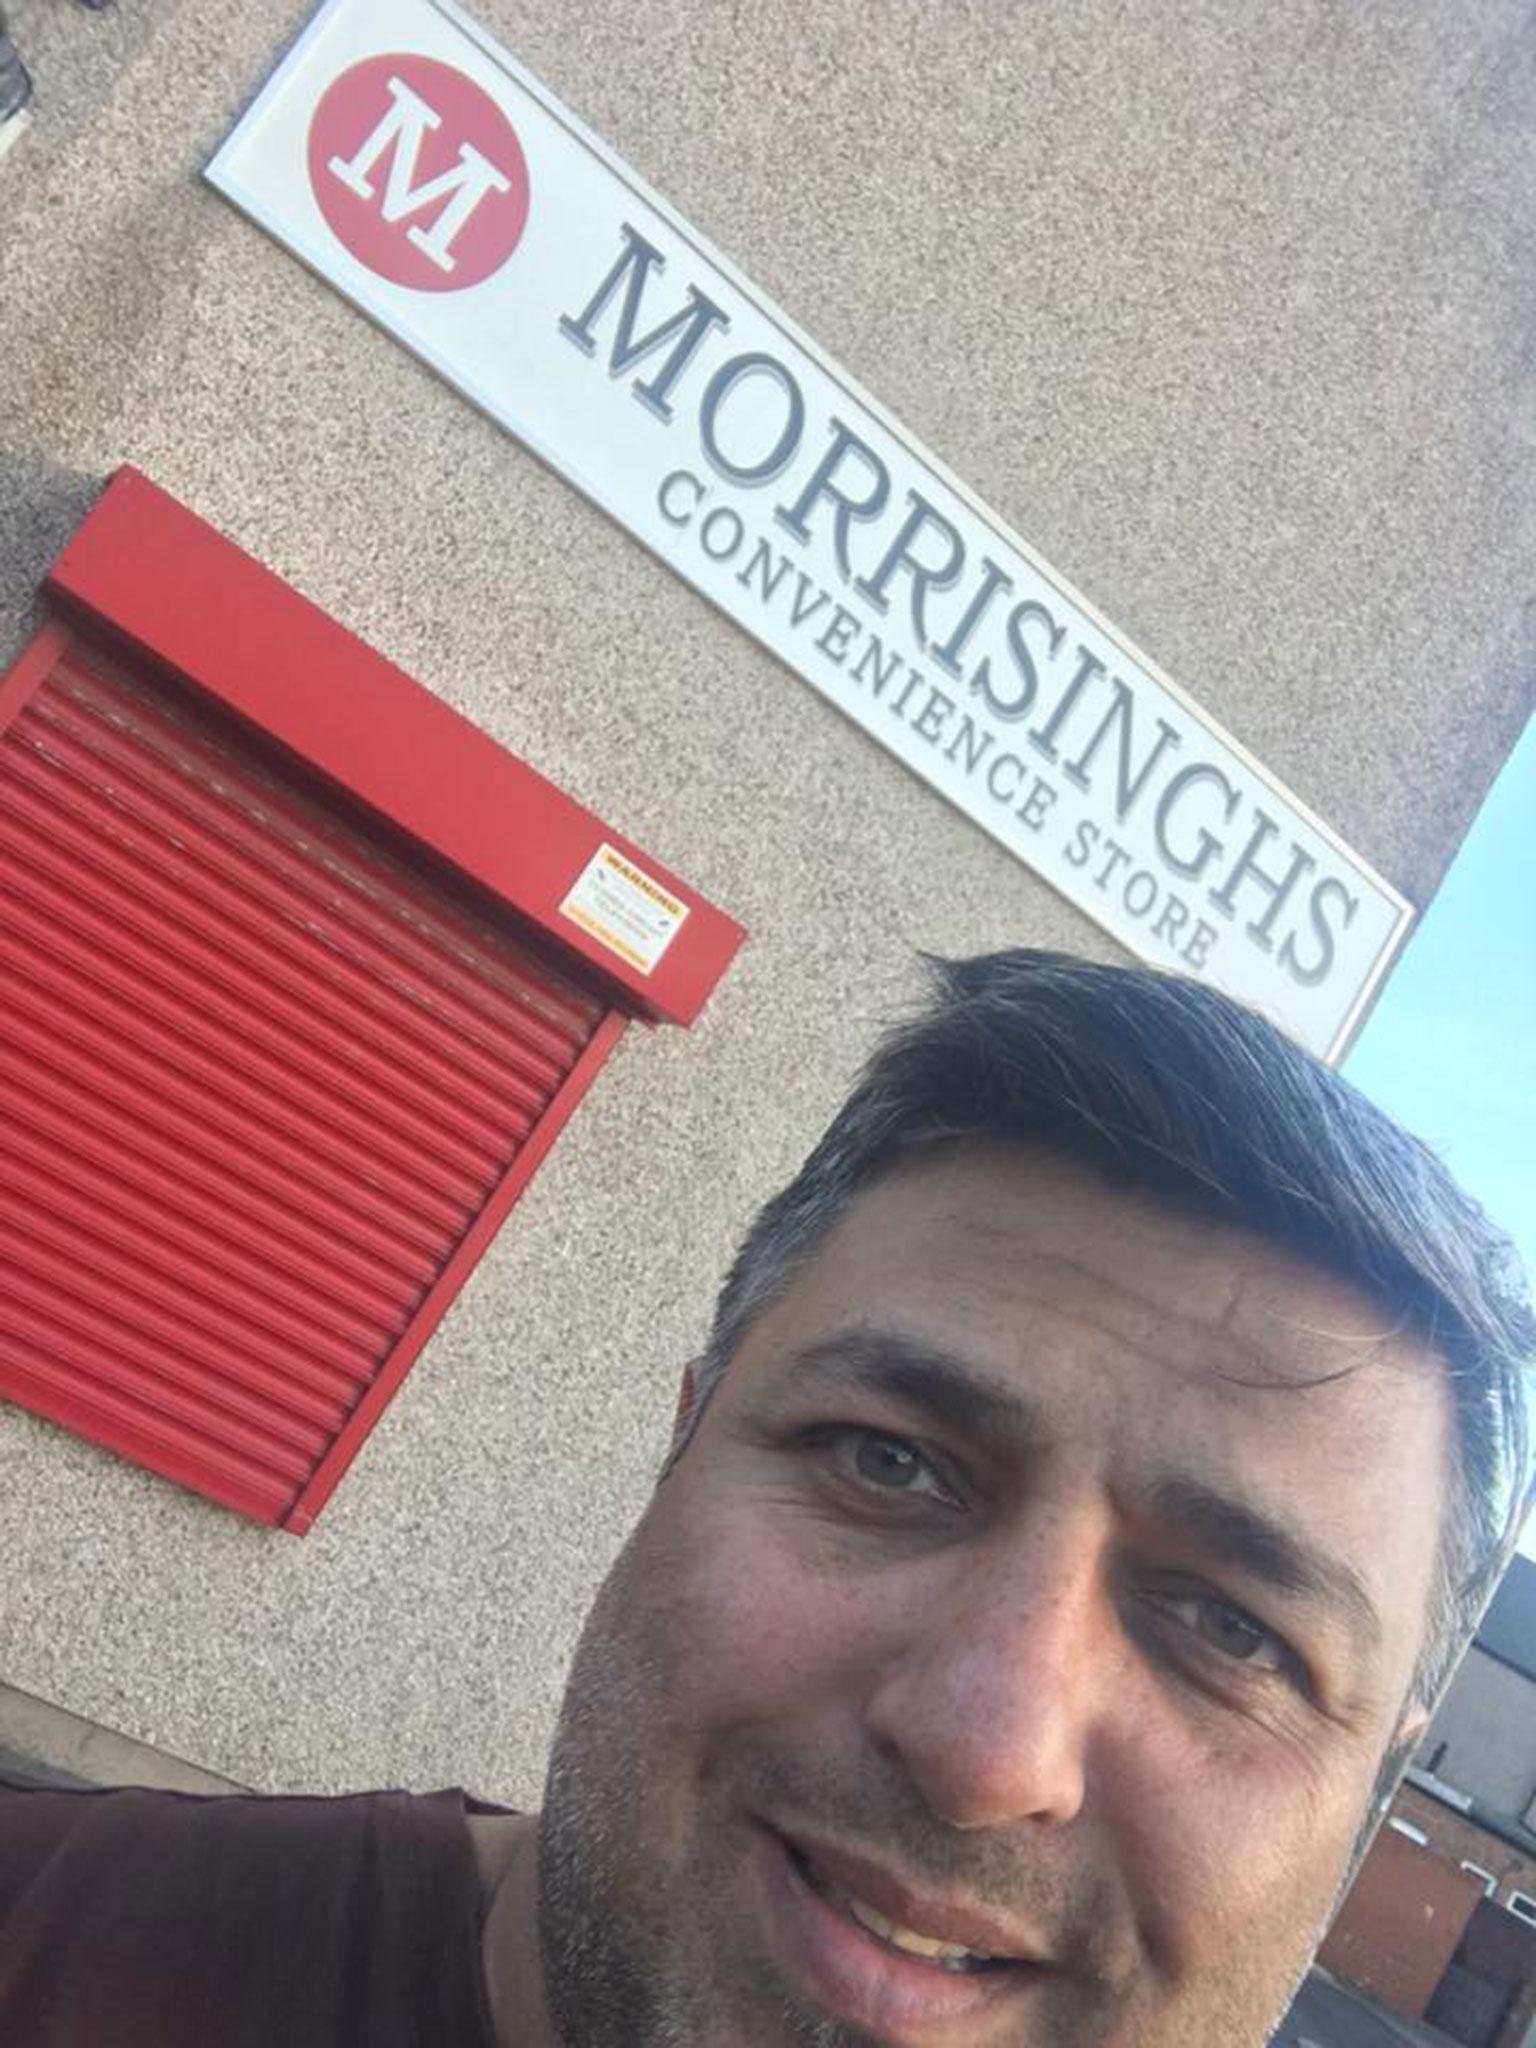 &#13;
After nearly five years, Jel Singh Nagra settled on the name Morrisinghs &#13;